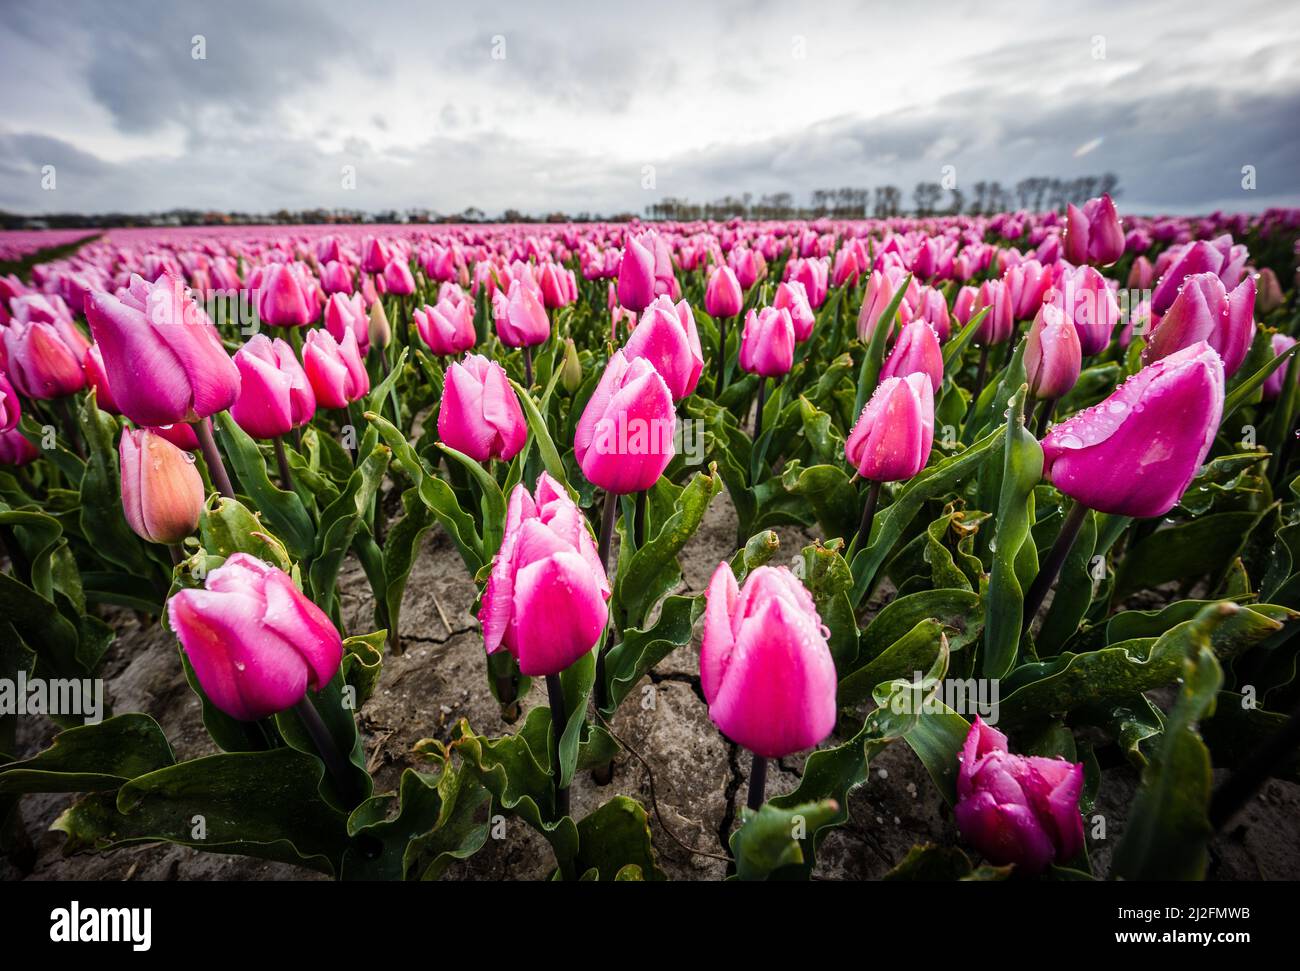 2022-03-31 08:11:44 31-03-2022, Zuid-Beijerland - Tulip fields in bloom on a field in Zuid-Beijerland. The tulips bloom early this year due to the beautiful sunny weather. Photo: ANP / Hollandse Hoogte / Jeffrey Groeneweg netherlands out - belgium out Stock Photo